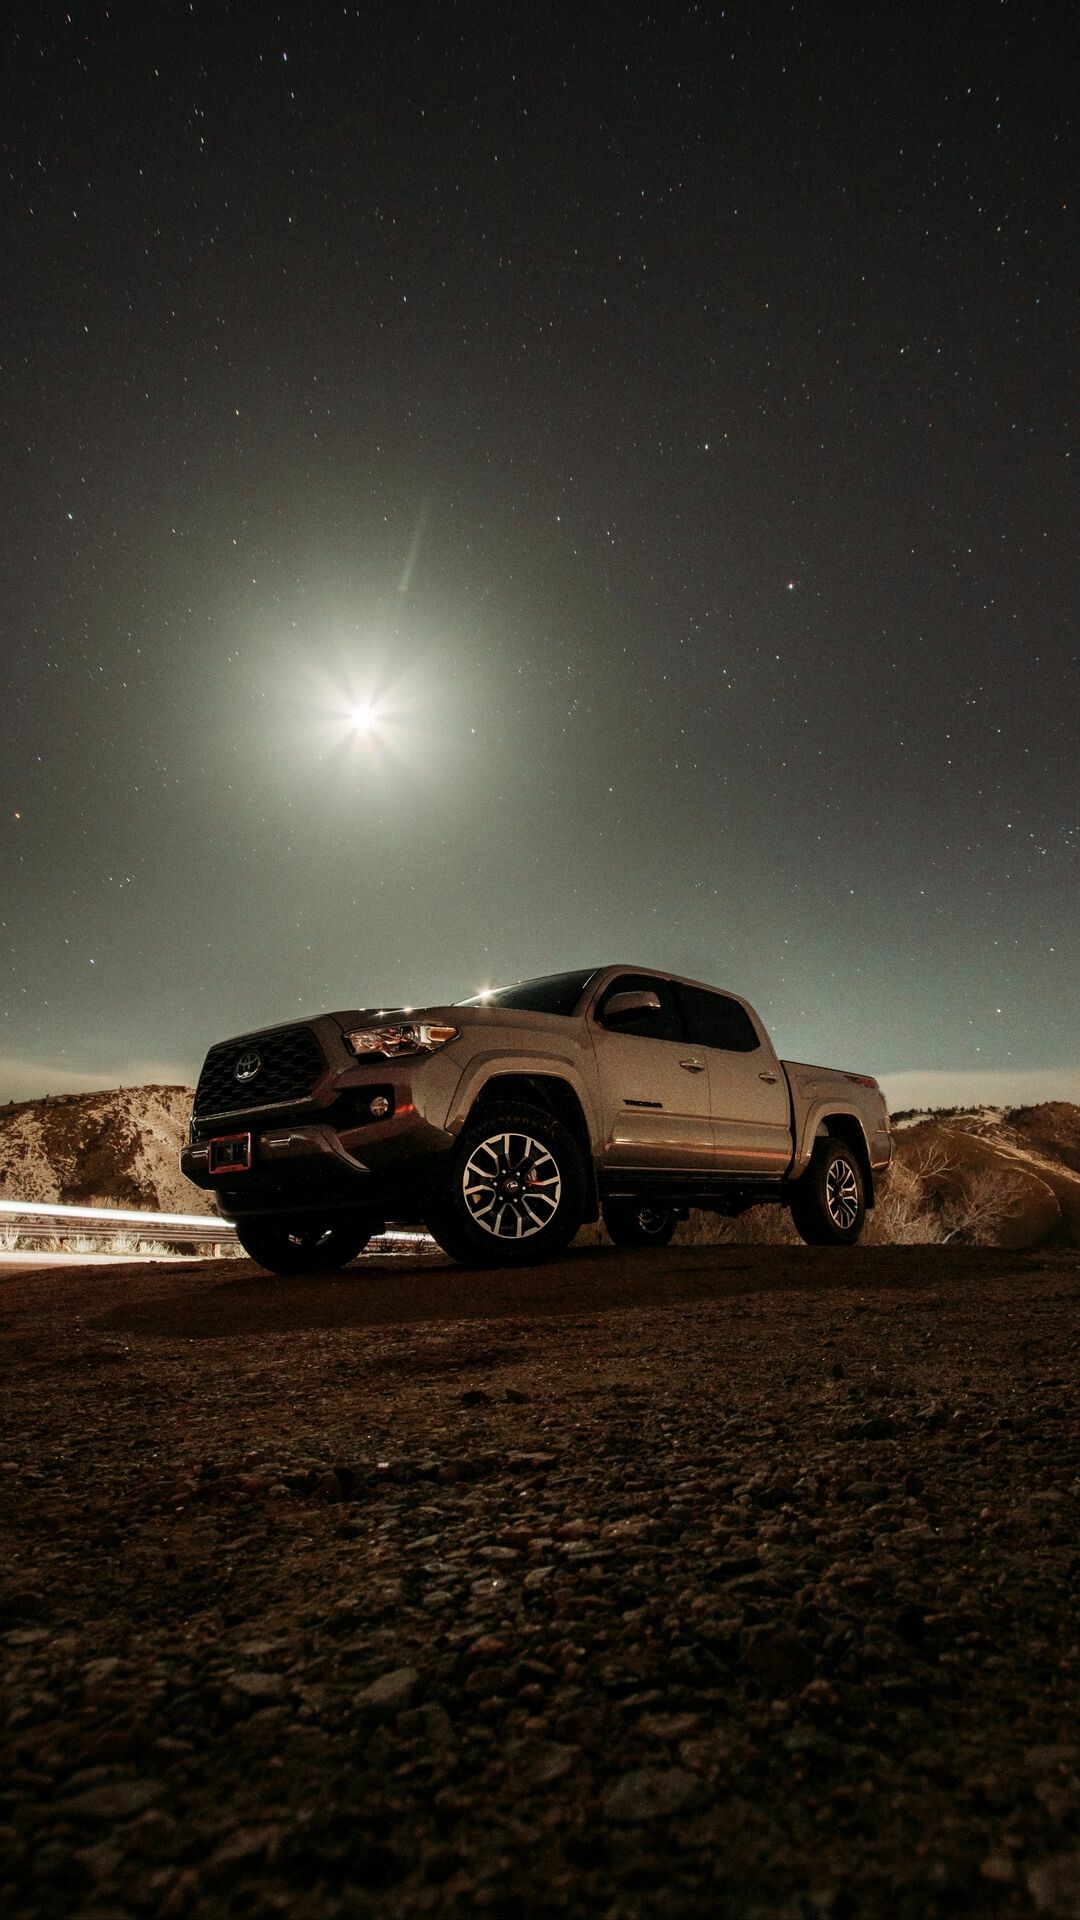 Toyota Tacoma: A pickup truck manufactured by the automobile manufacturer since 1995. 1080x1920 Full HD Wallpaper.